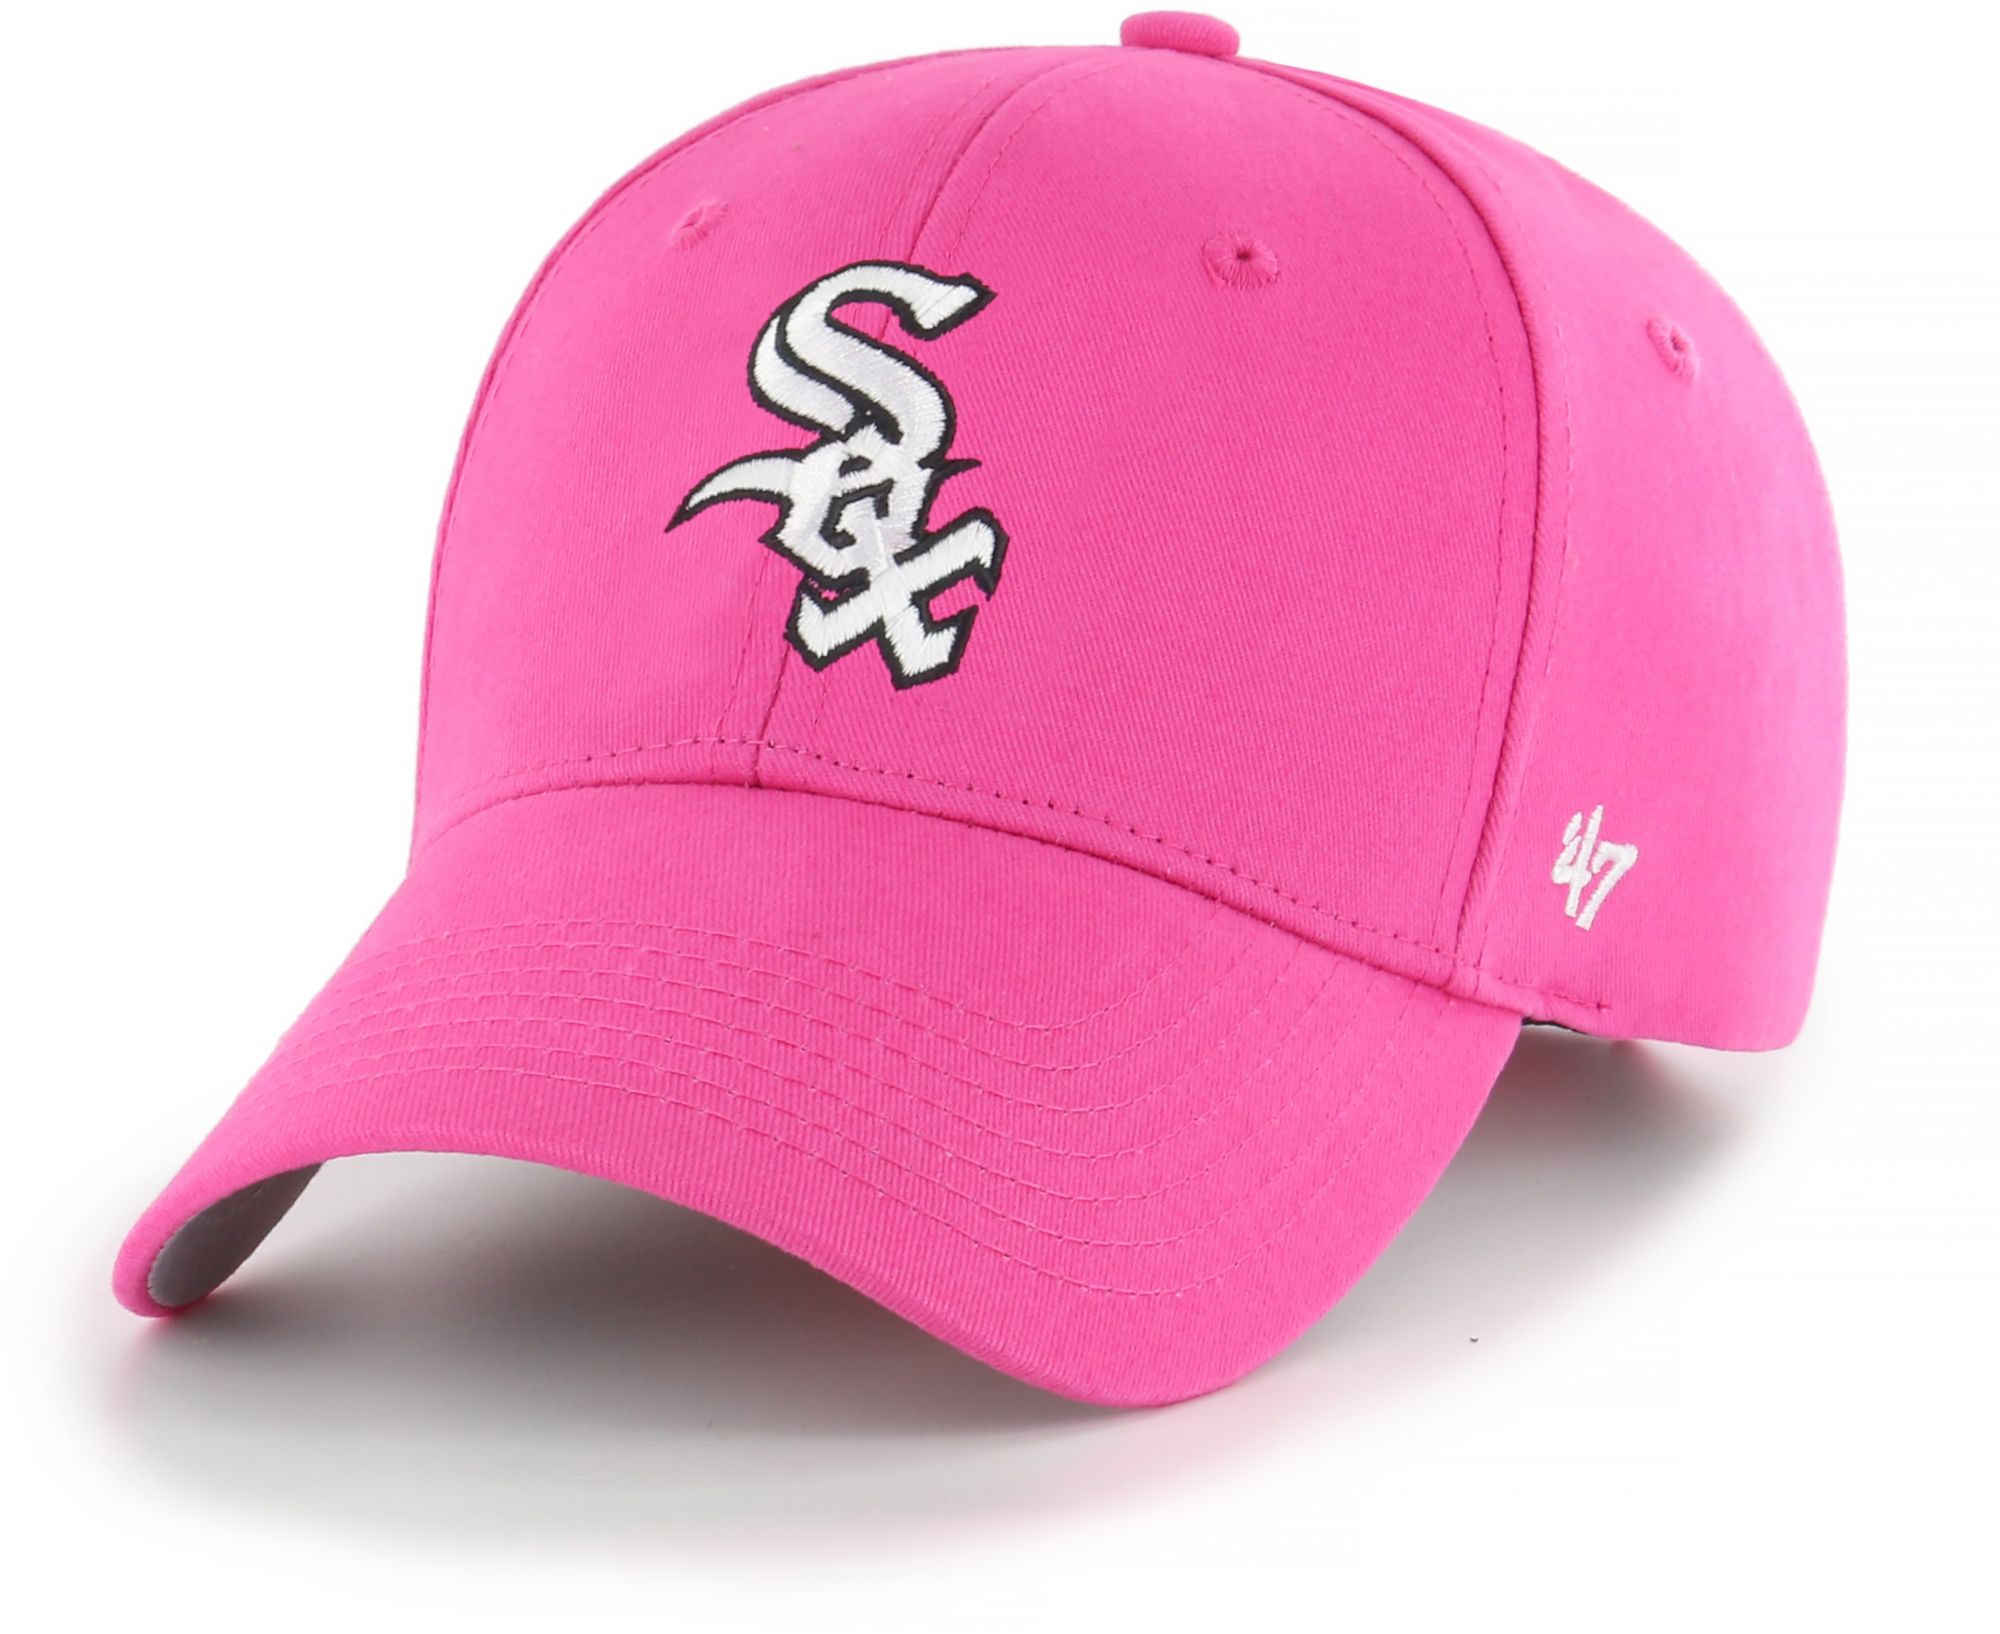 pink chicago white sox jersey